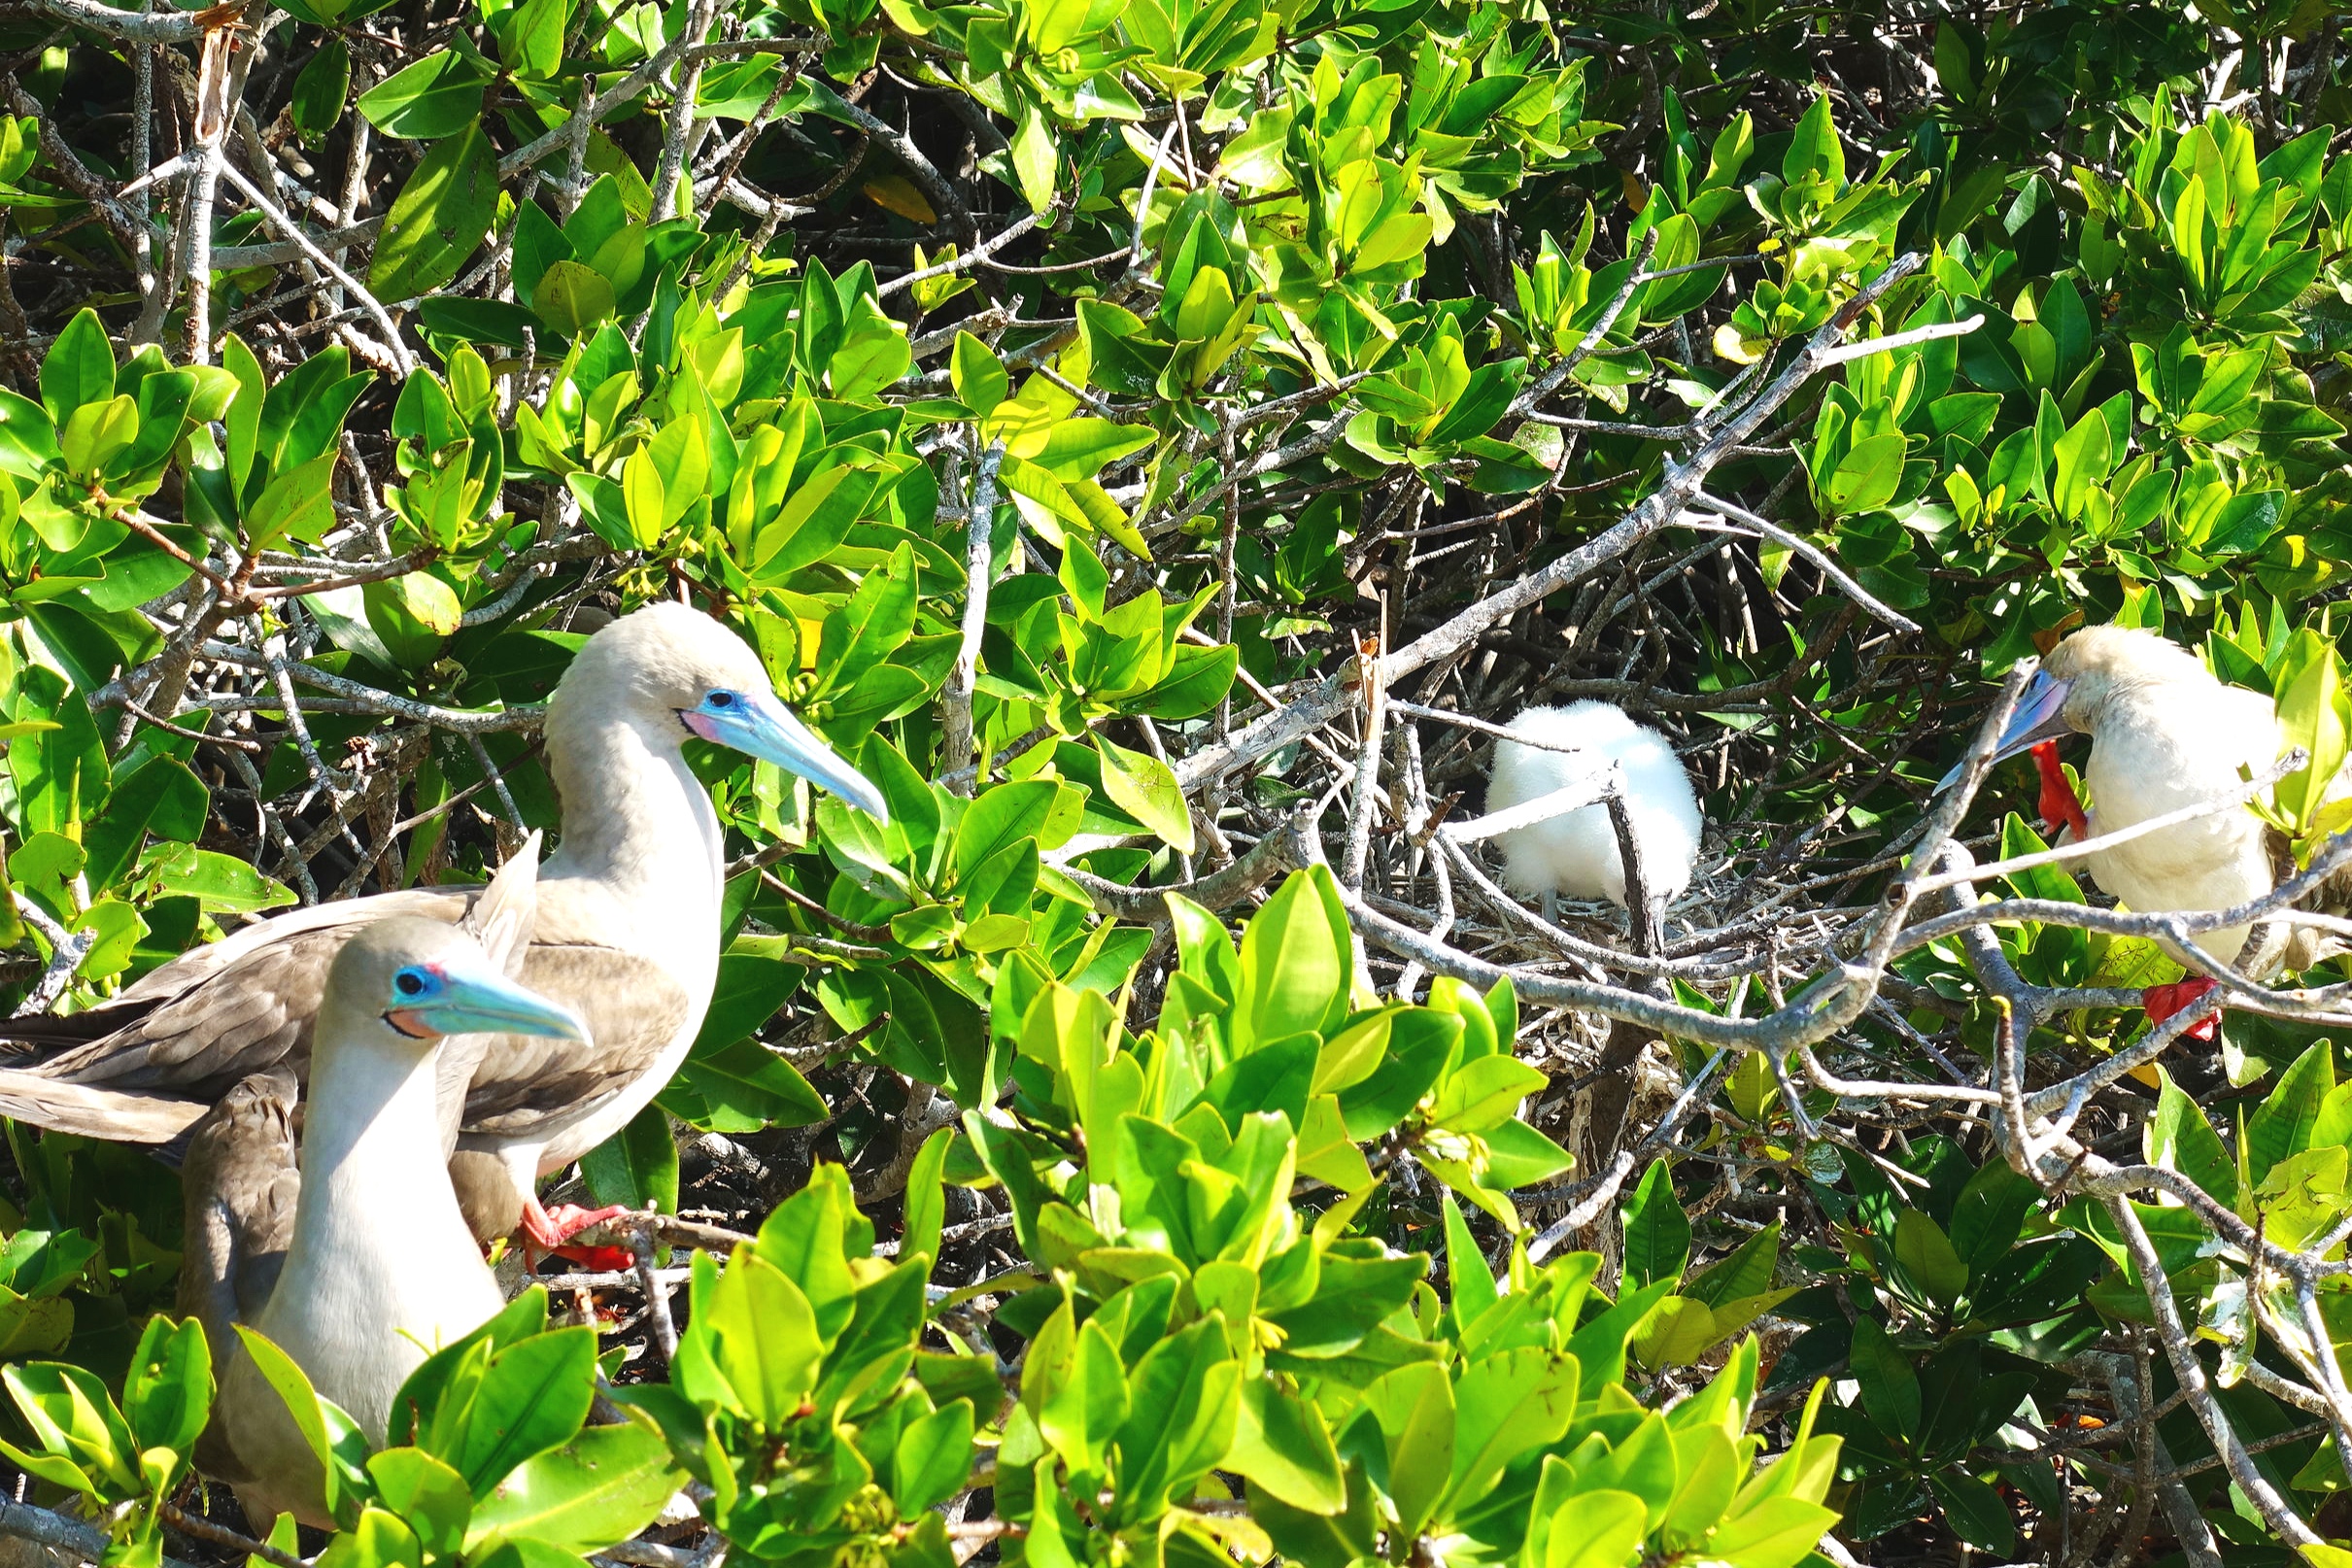  Red footed boobies nesting in the mangroves.  